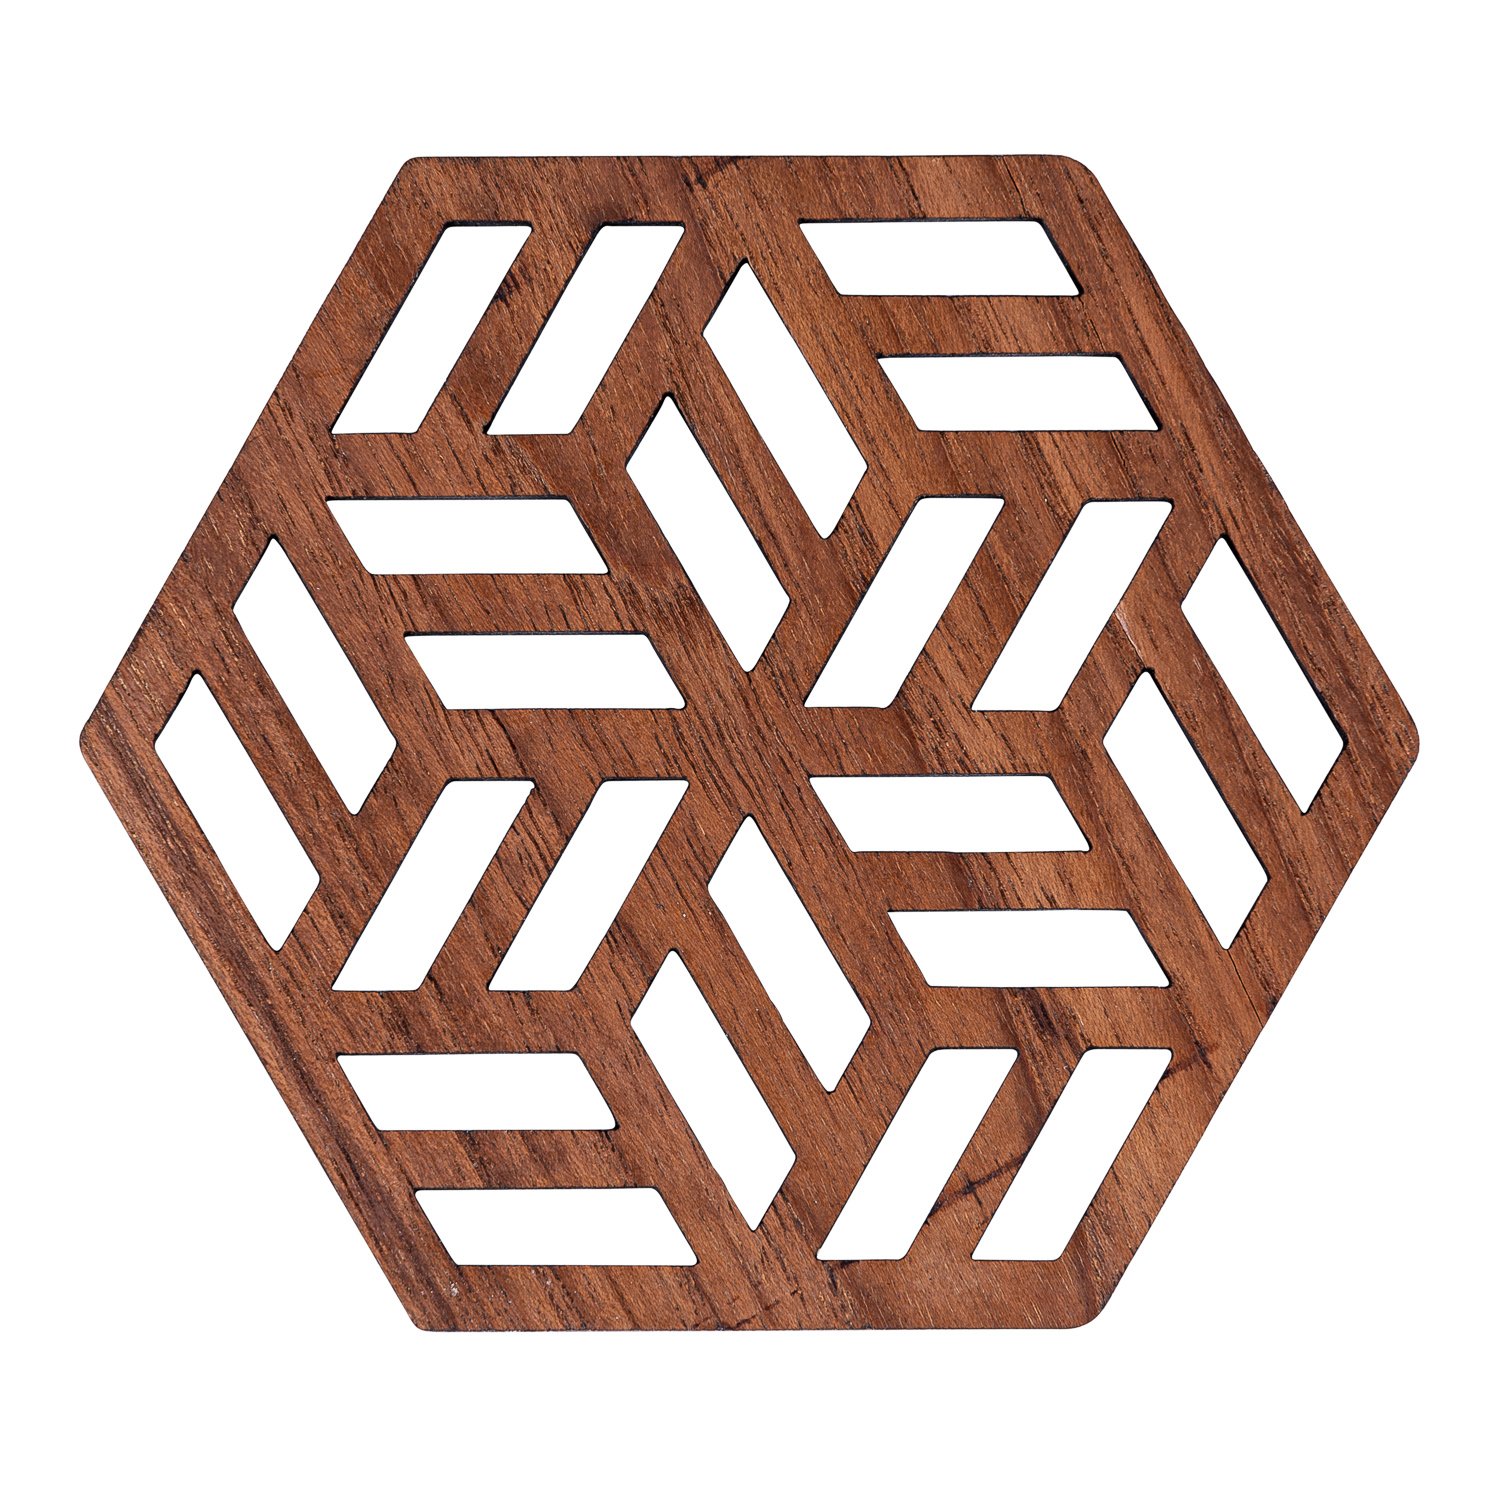 Teak Wood Coasters Set of 4, Square with Inner Square 9cm